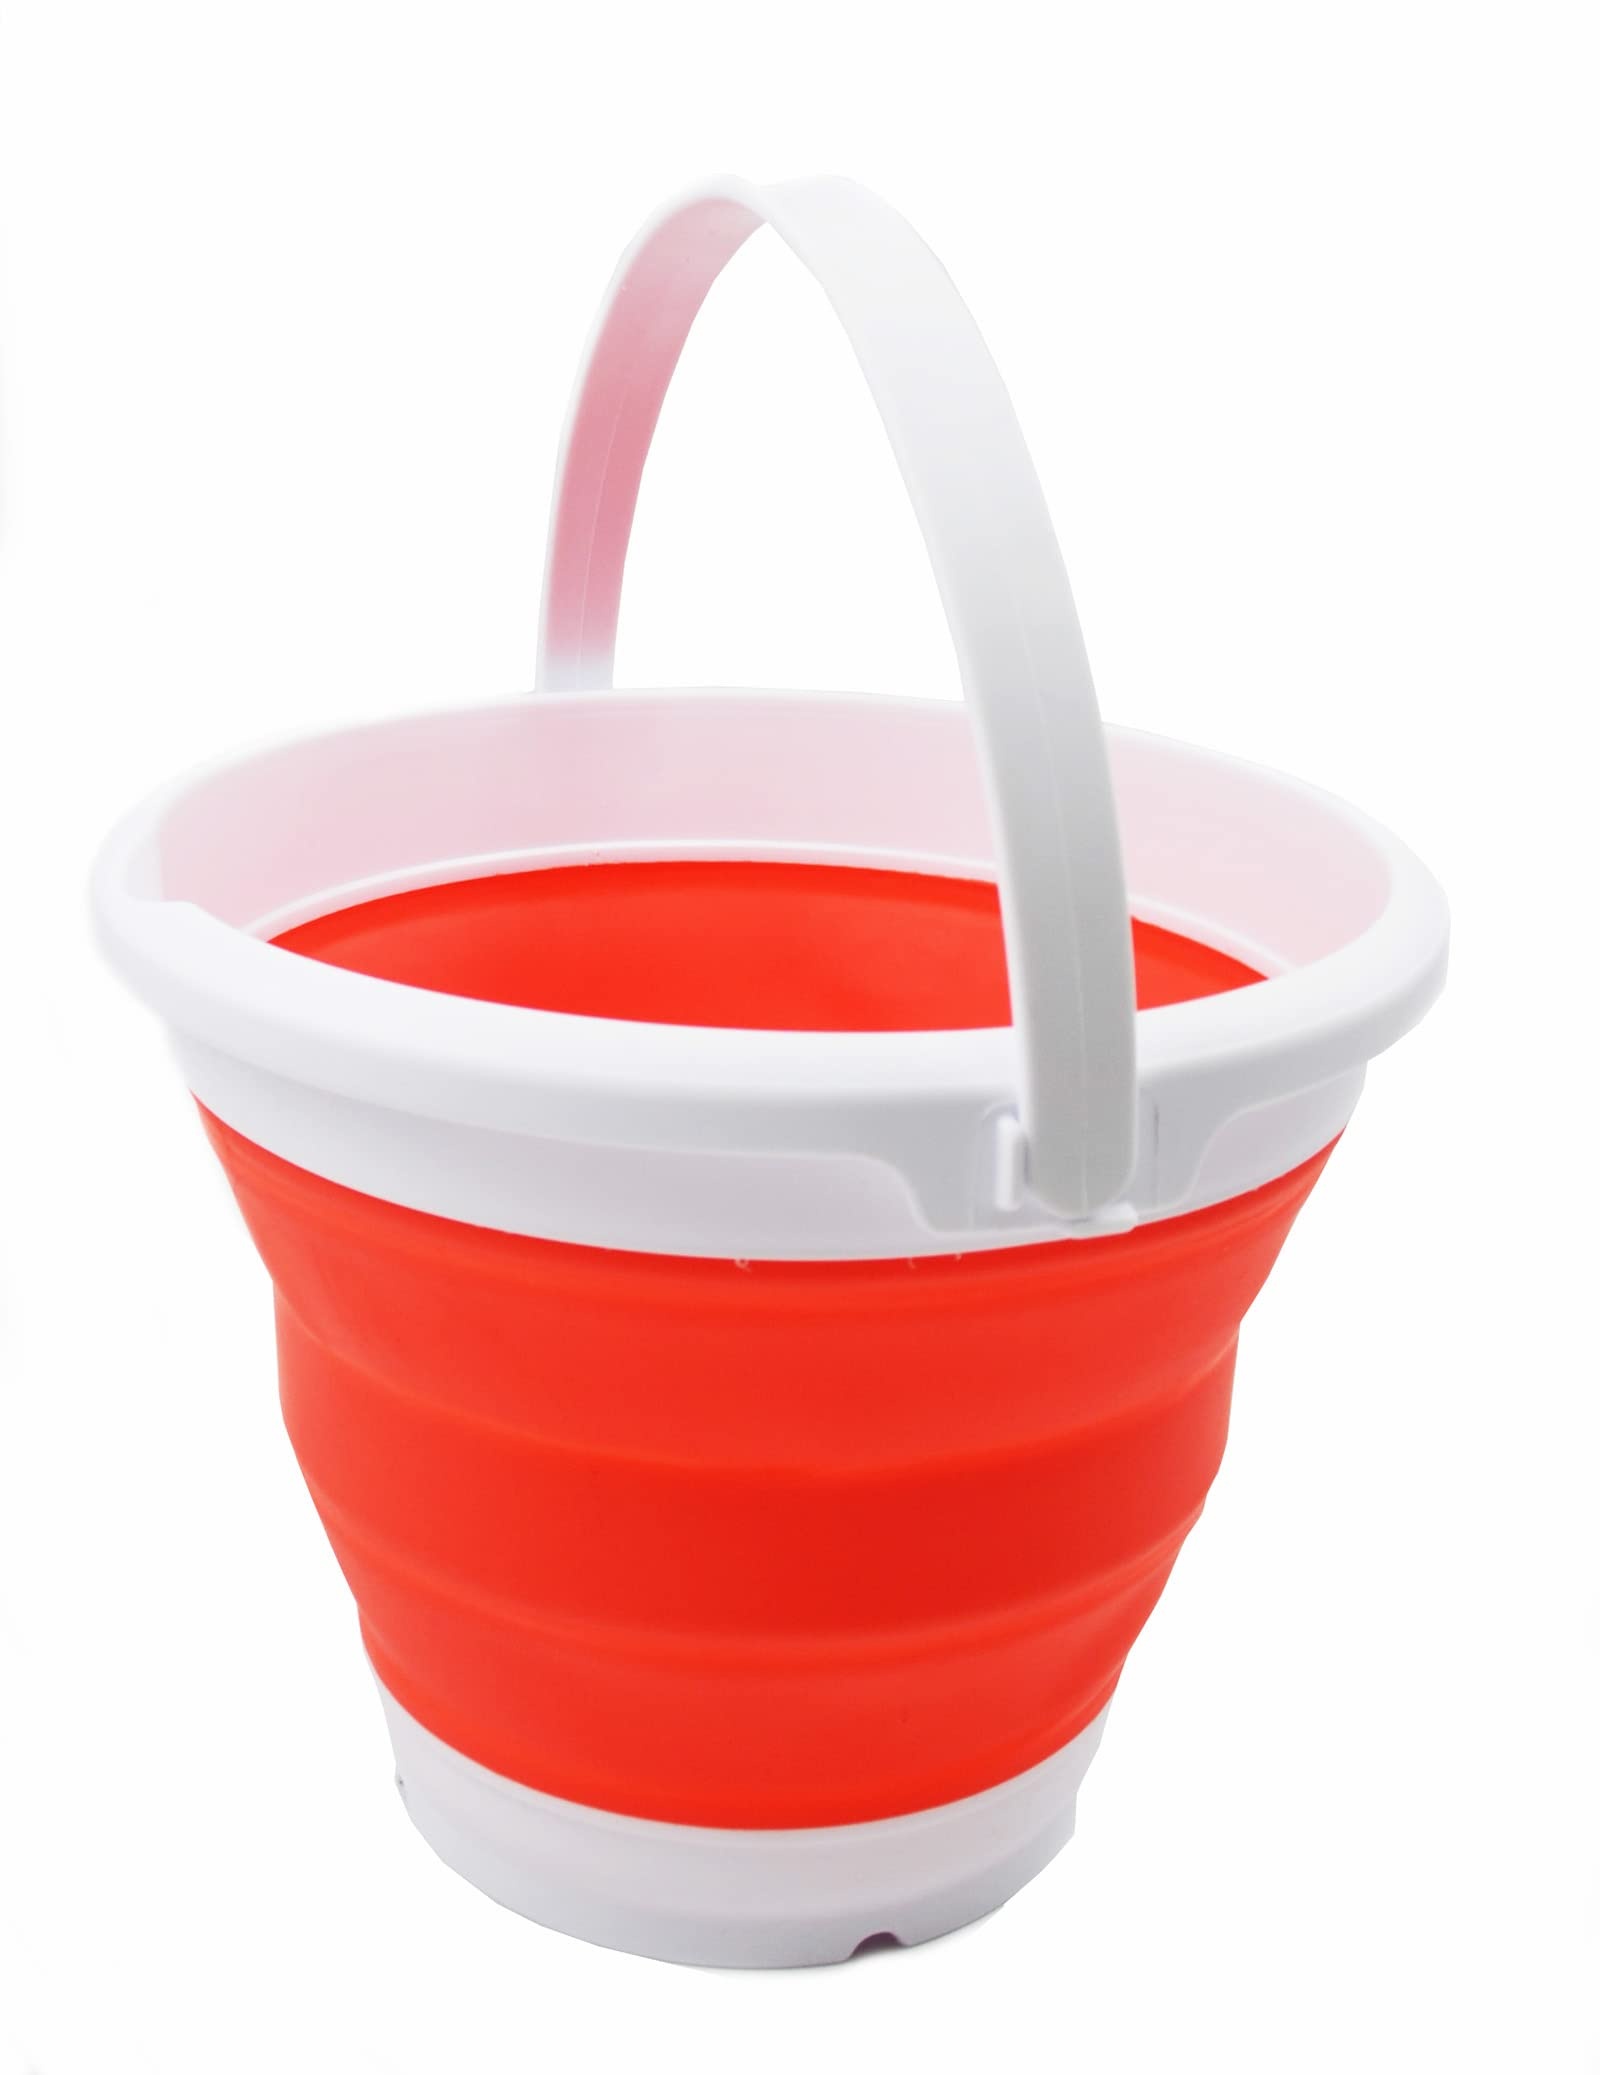 SAMMART 5.5L Collapsible Plastic Bucket - Foldable Round Tub - Portable Fishing Water Pail - Space Saving Outdoor Waterpot (Weiß/Orange/Rot)